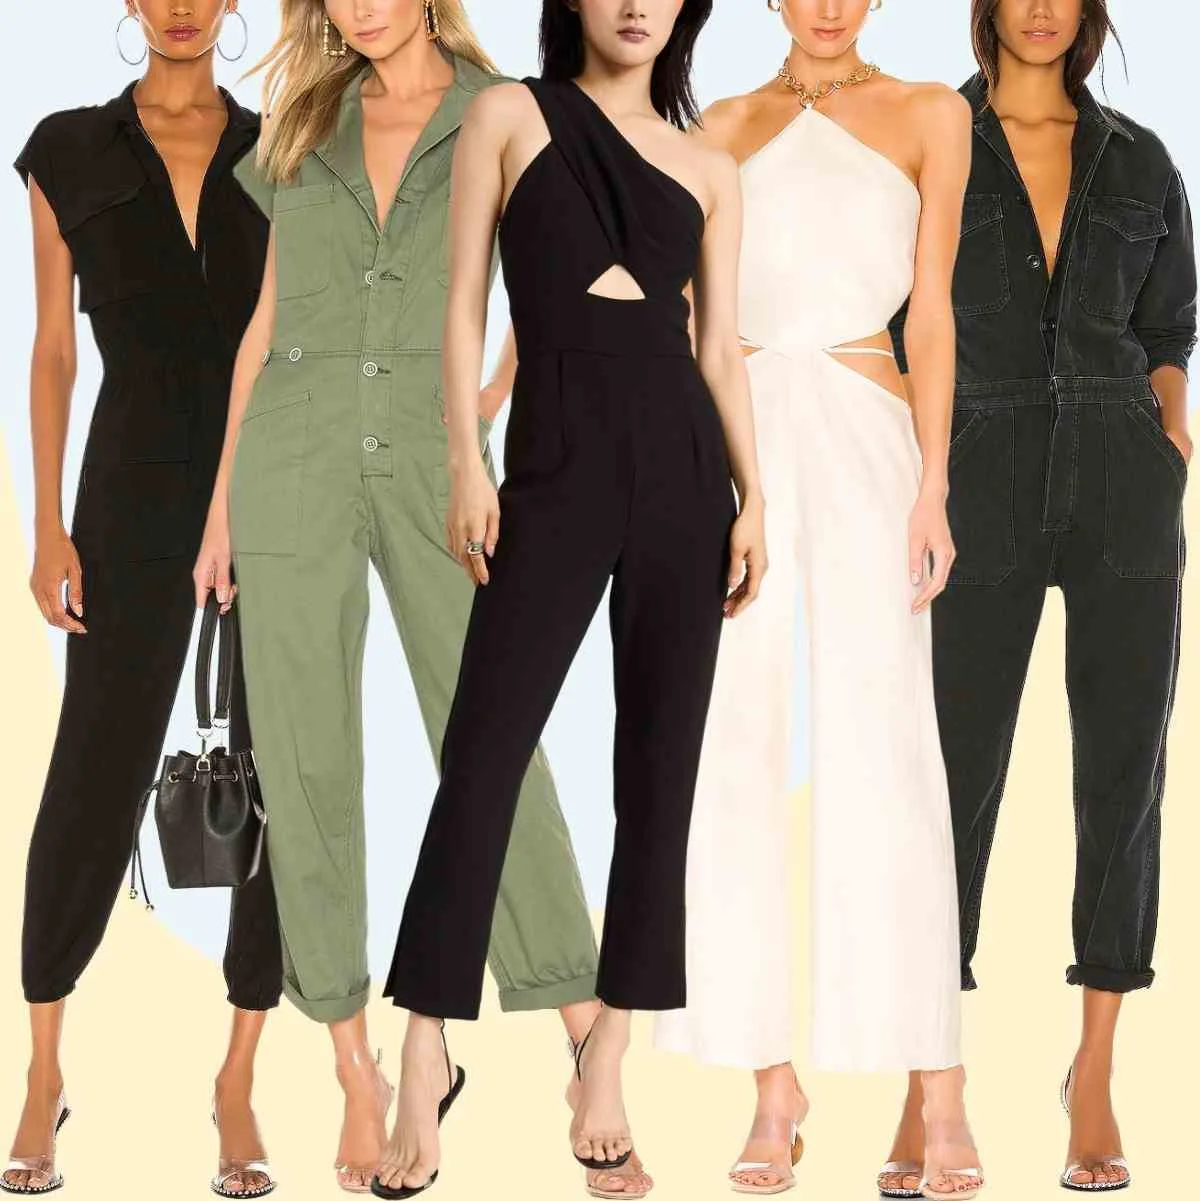 Collage of 5 women wearing different clear heel outfits with jumpsuits.